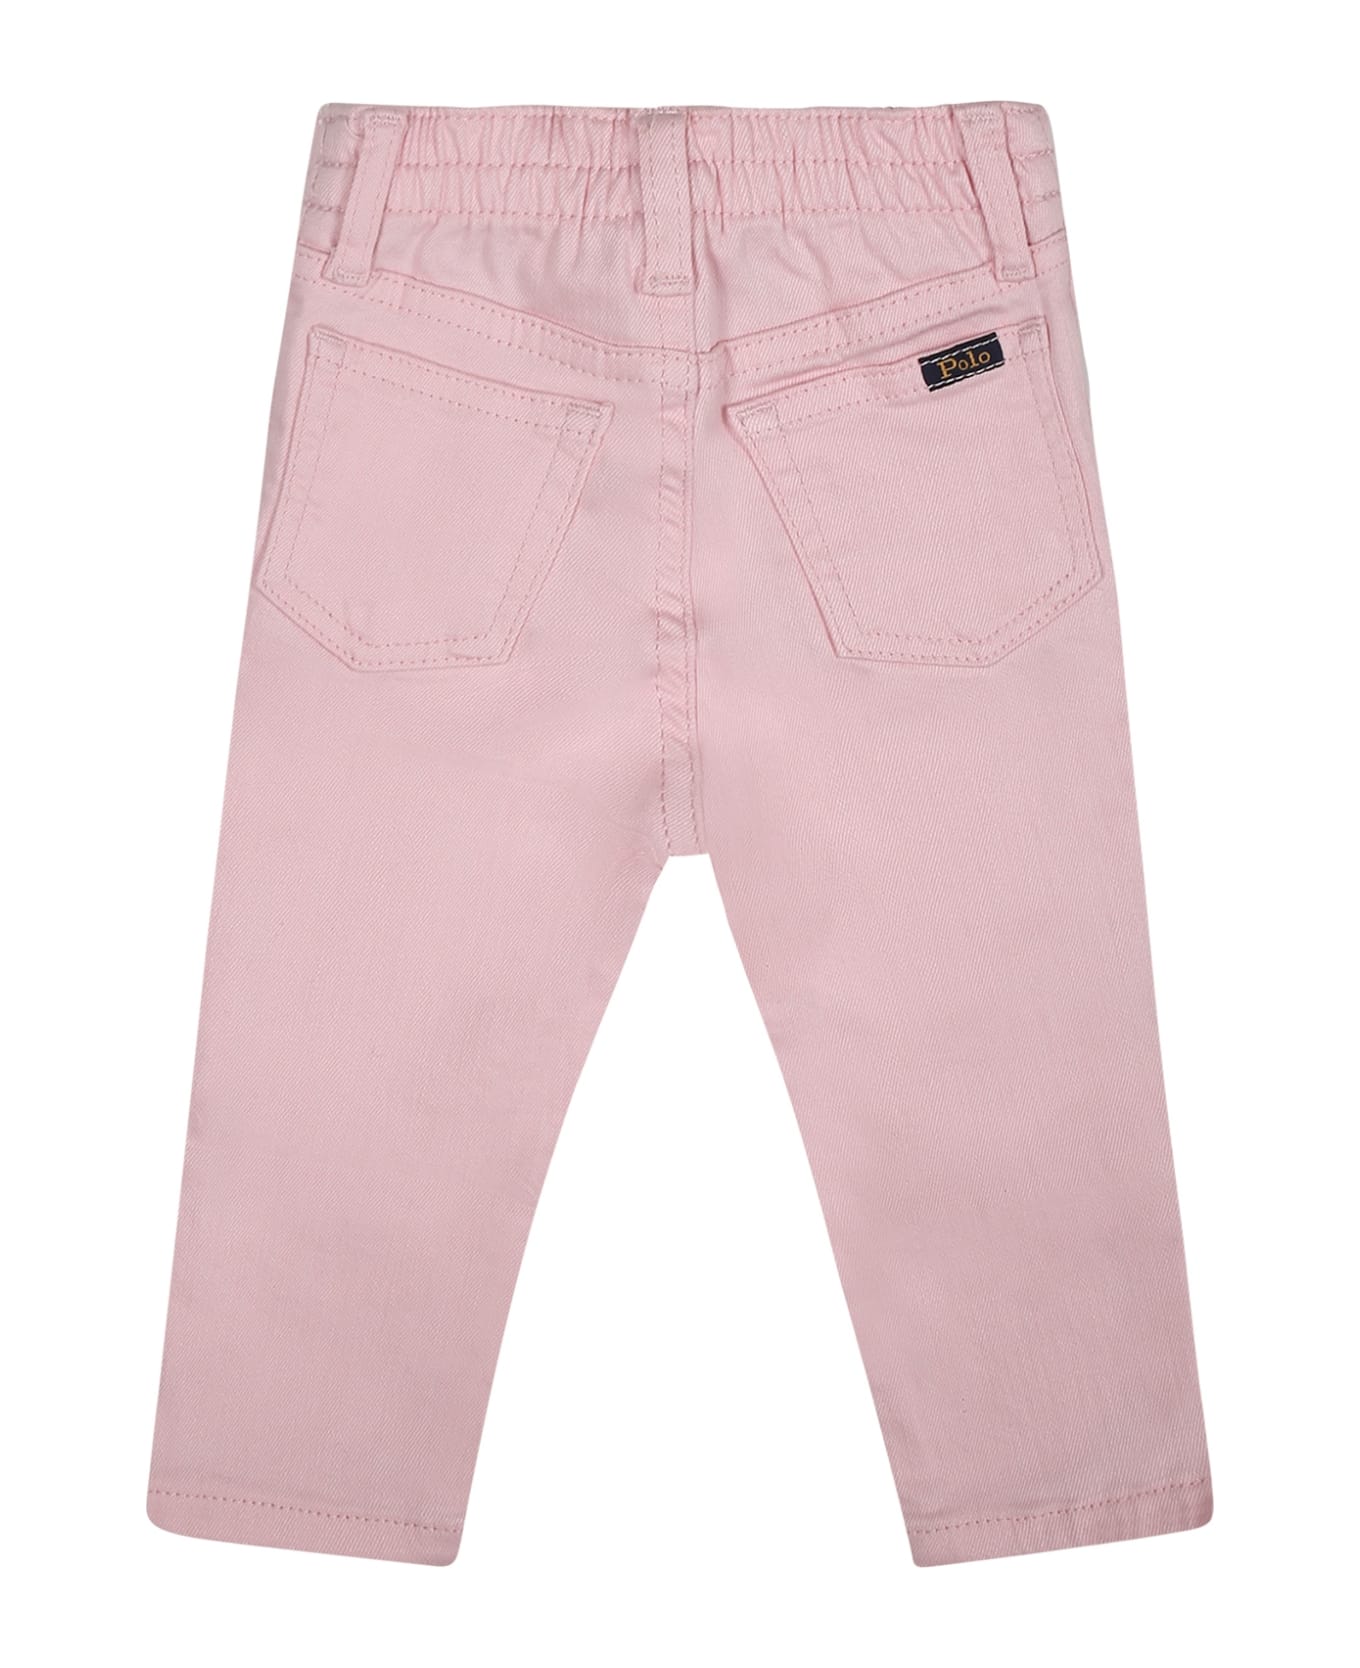 Ralph Lauren Pink Jeans For Baby Girl With Logo - Pink